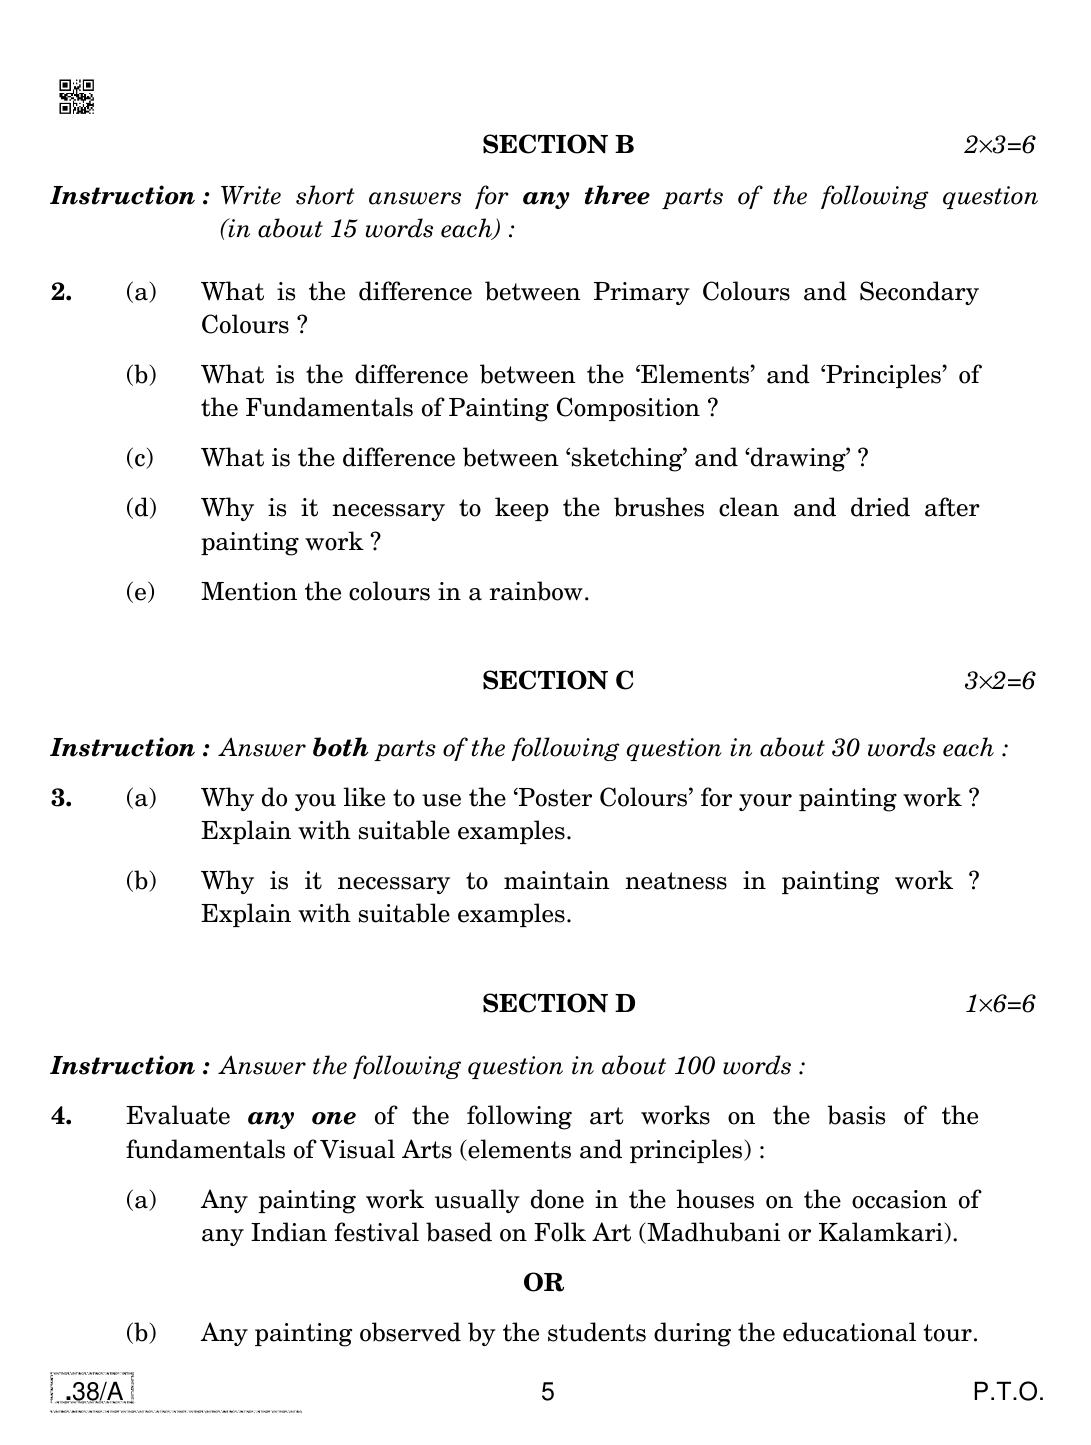 CBSE Class 10 Painting 2020 Compartment Question Paper - Page 5